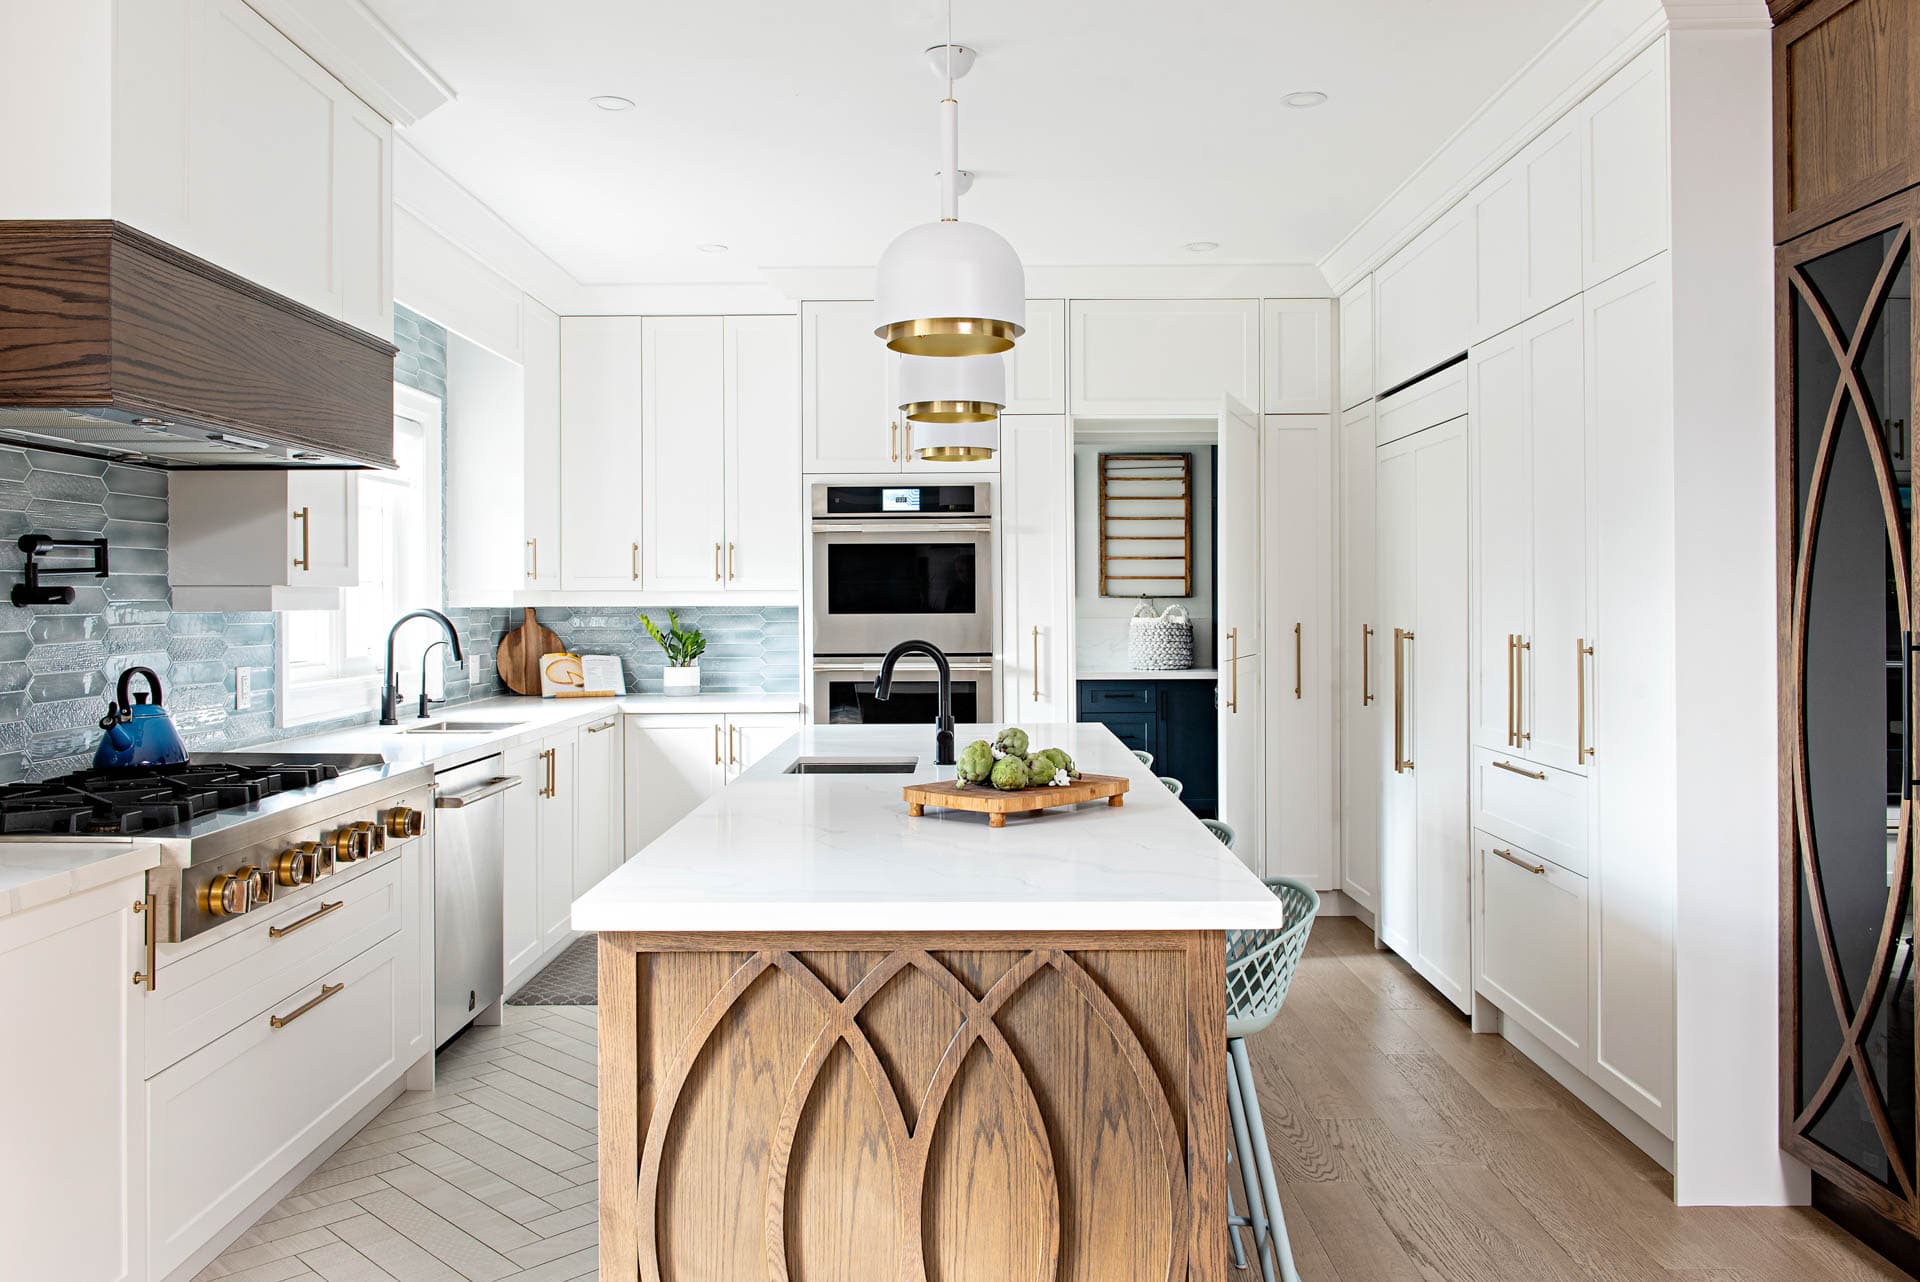 Modern farmhouse white and wood kitchen design with secret laundry door